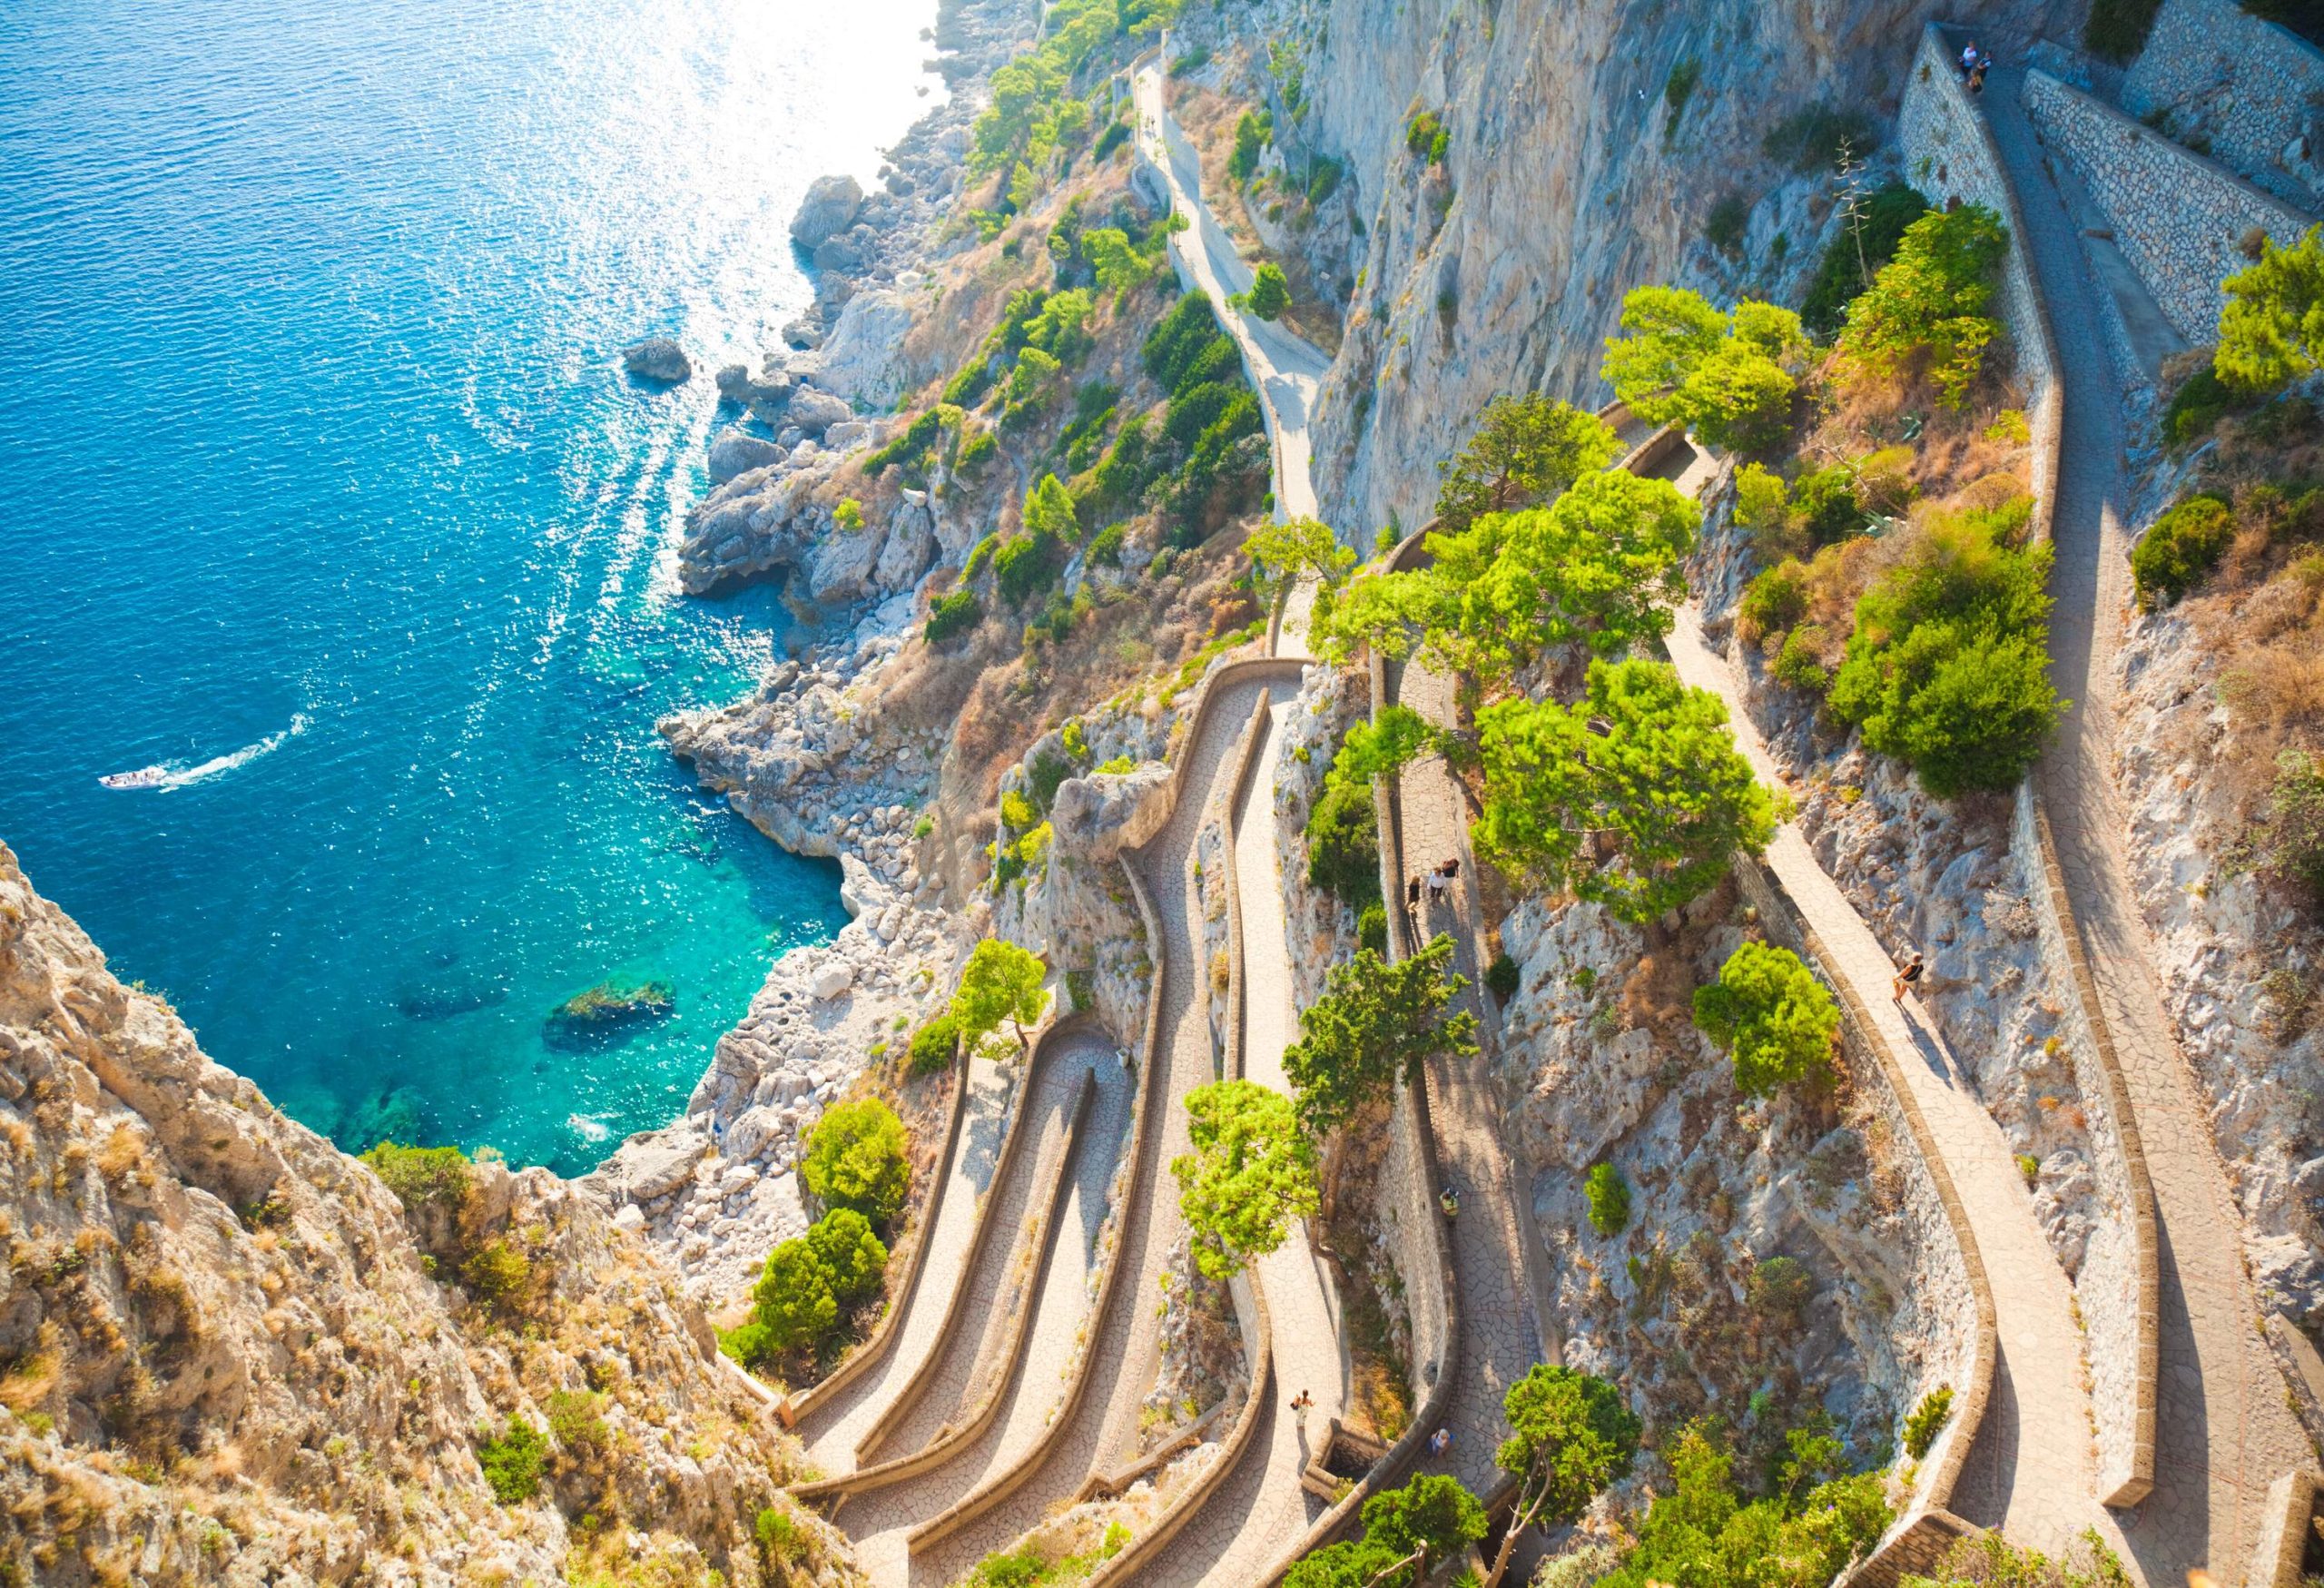 The Via Krupp in Capri with spectacular views of the bay's clear blue waters.